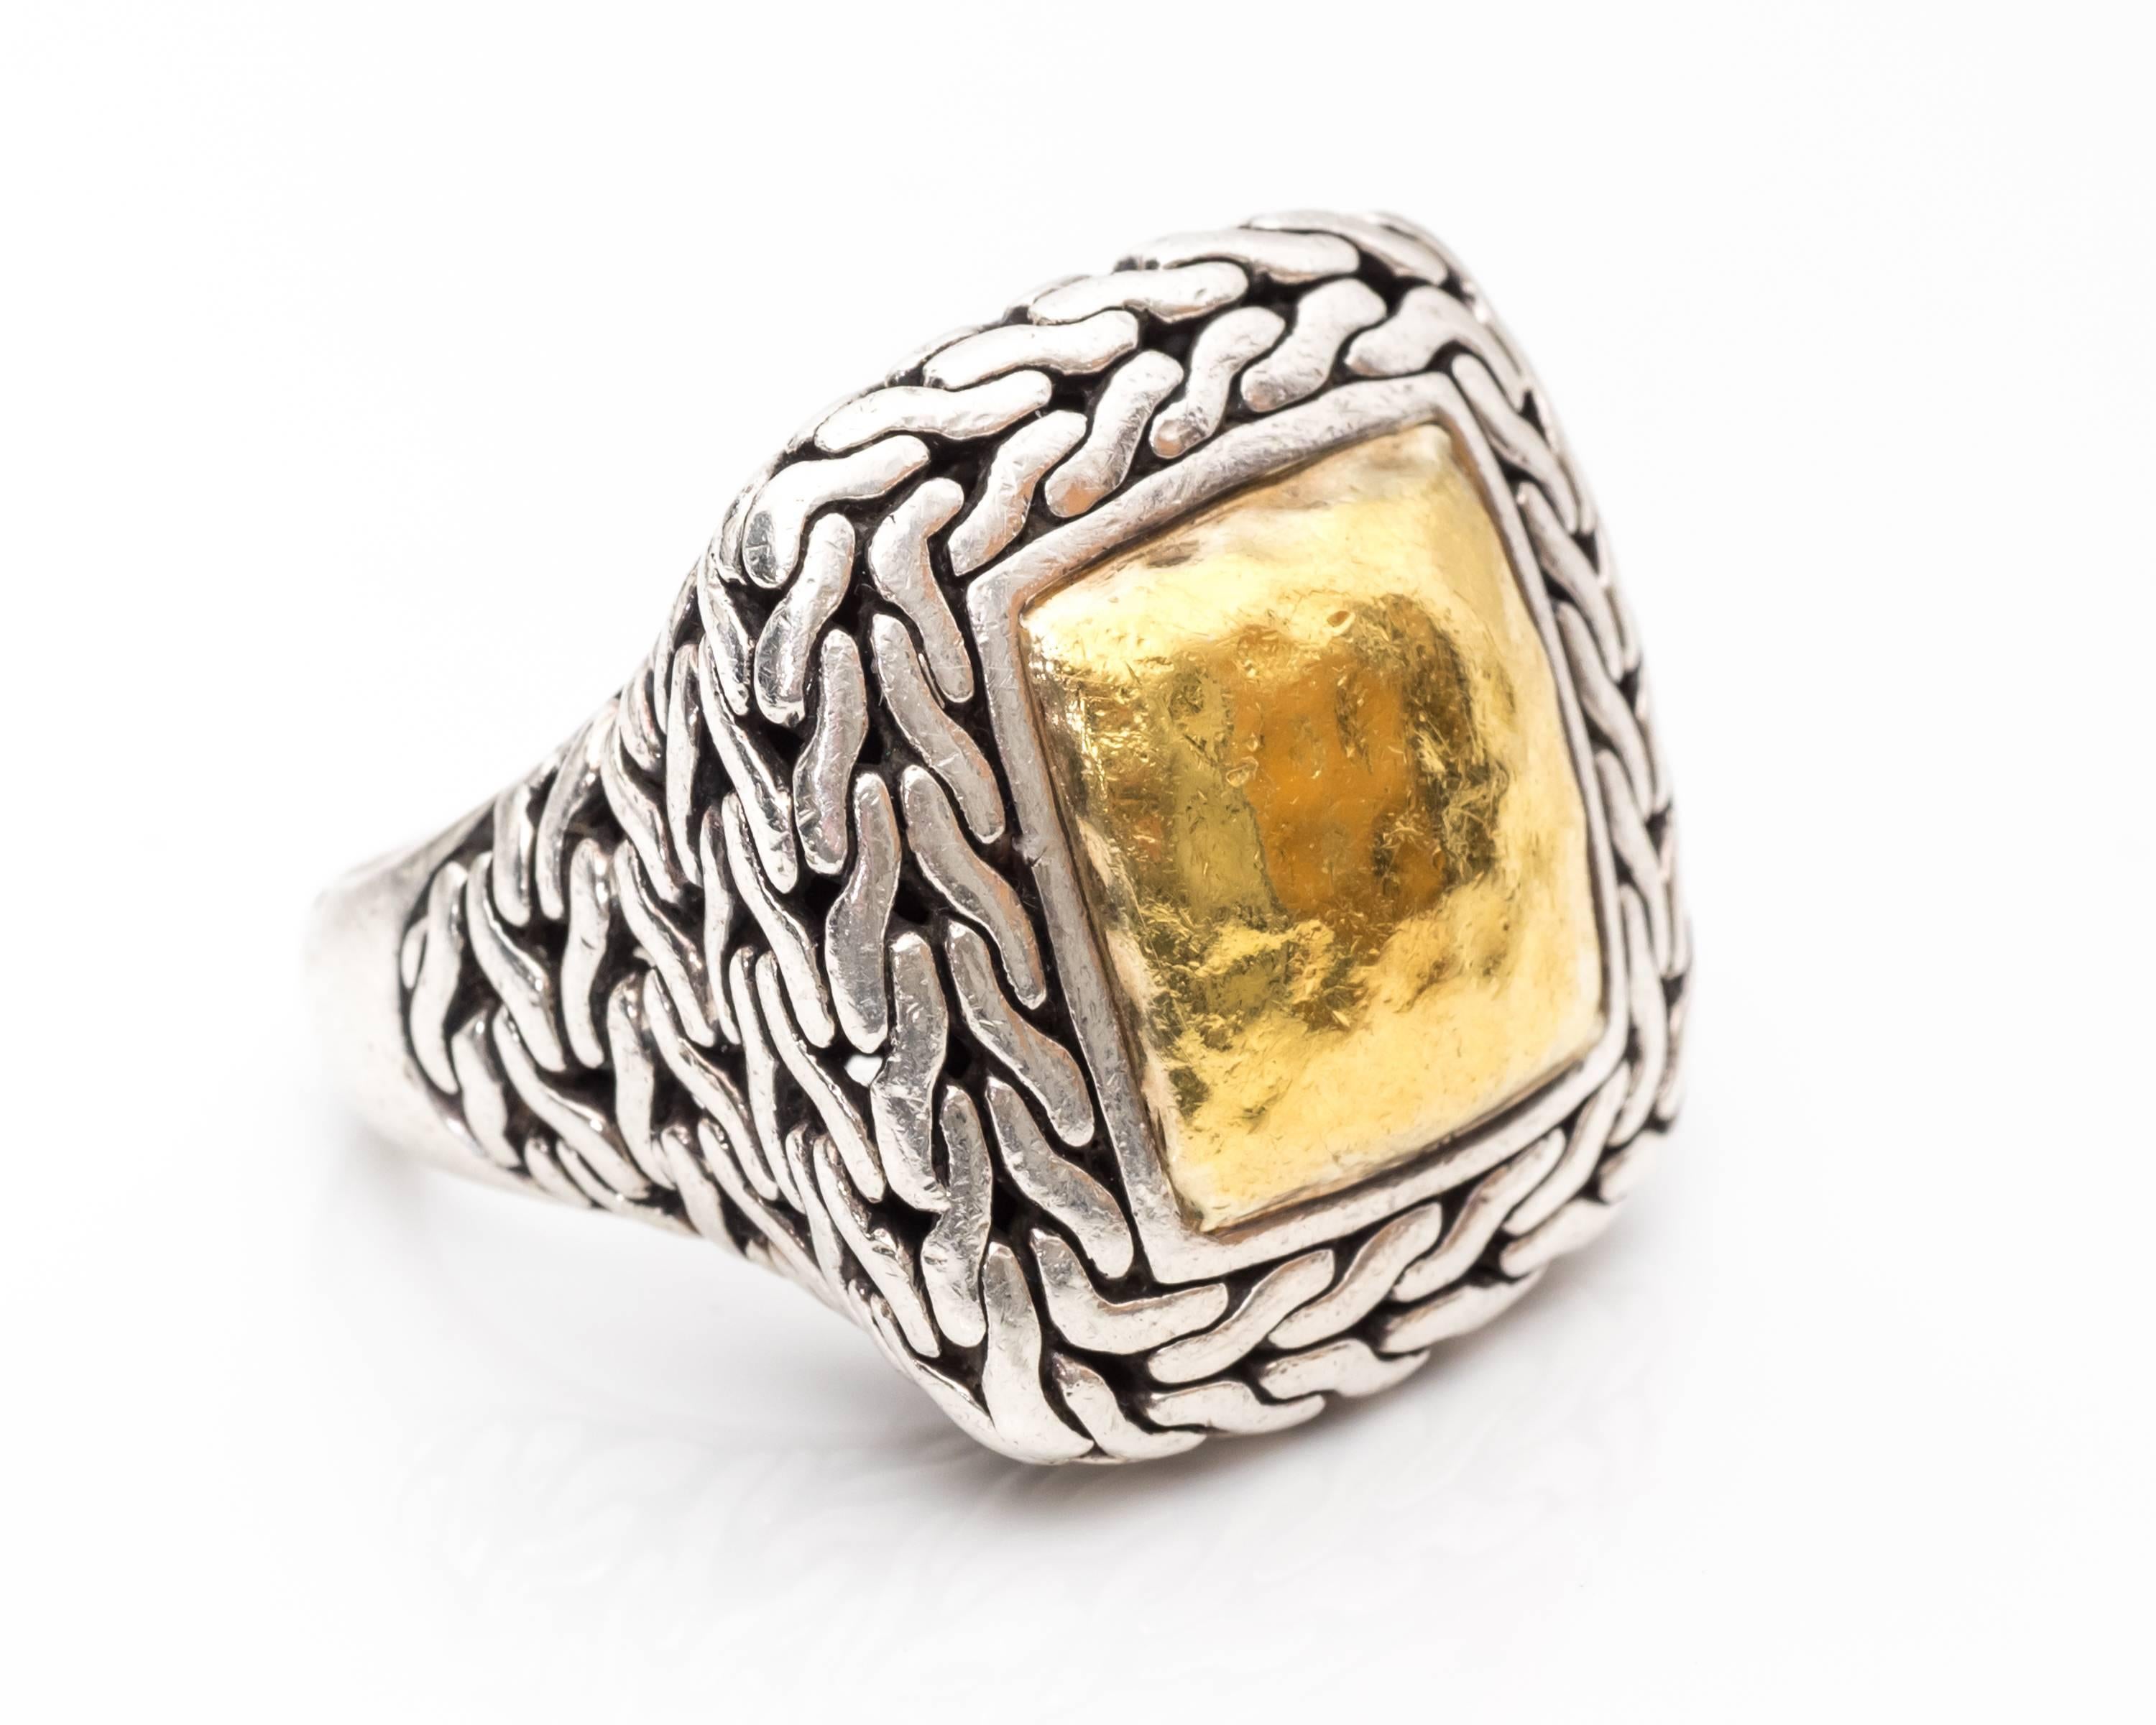 John Hardy Ring
Sterling Silver and 22 Karat Gold Ring
Unisex Design
Features Weave Twisted Pattern Design Halo Around Top Head and Shoulders of Shank
Hallmarked 